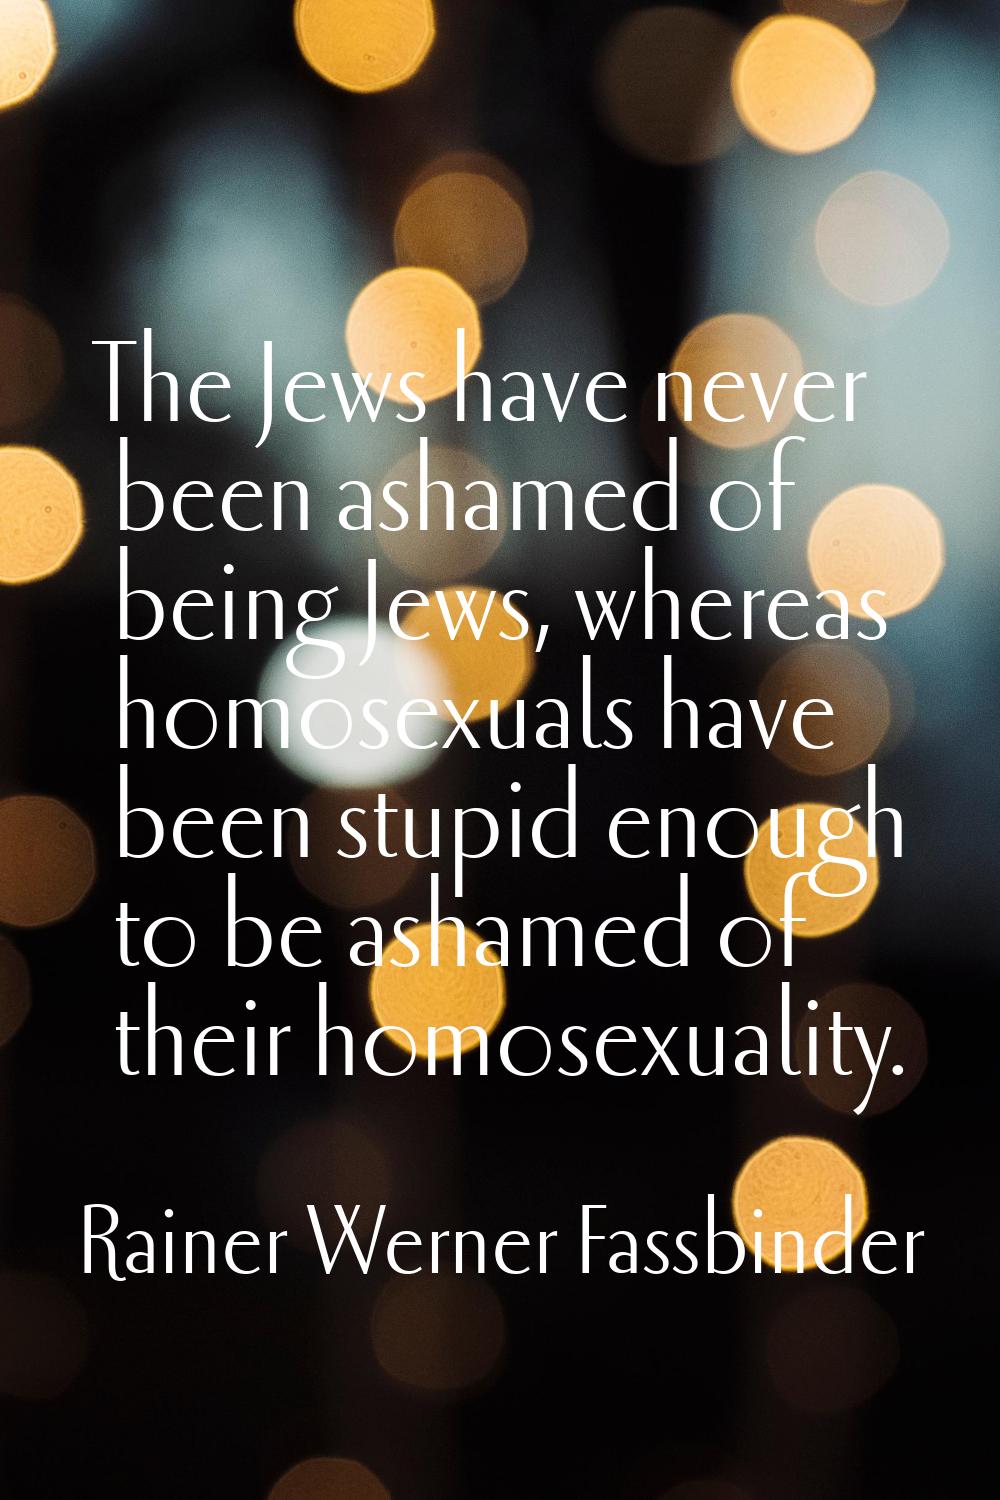 The Jews have never been ashamed of being Jews, whereas homosexuals have been stupid enough to be a